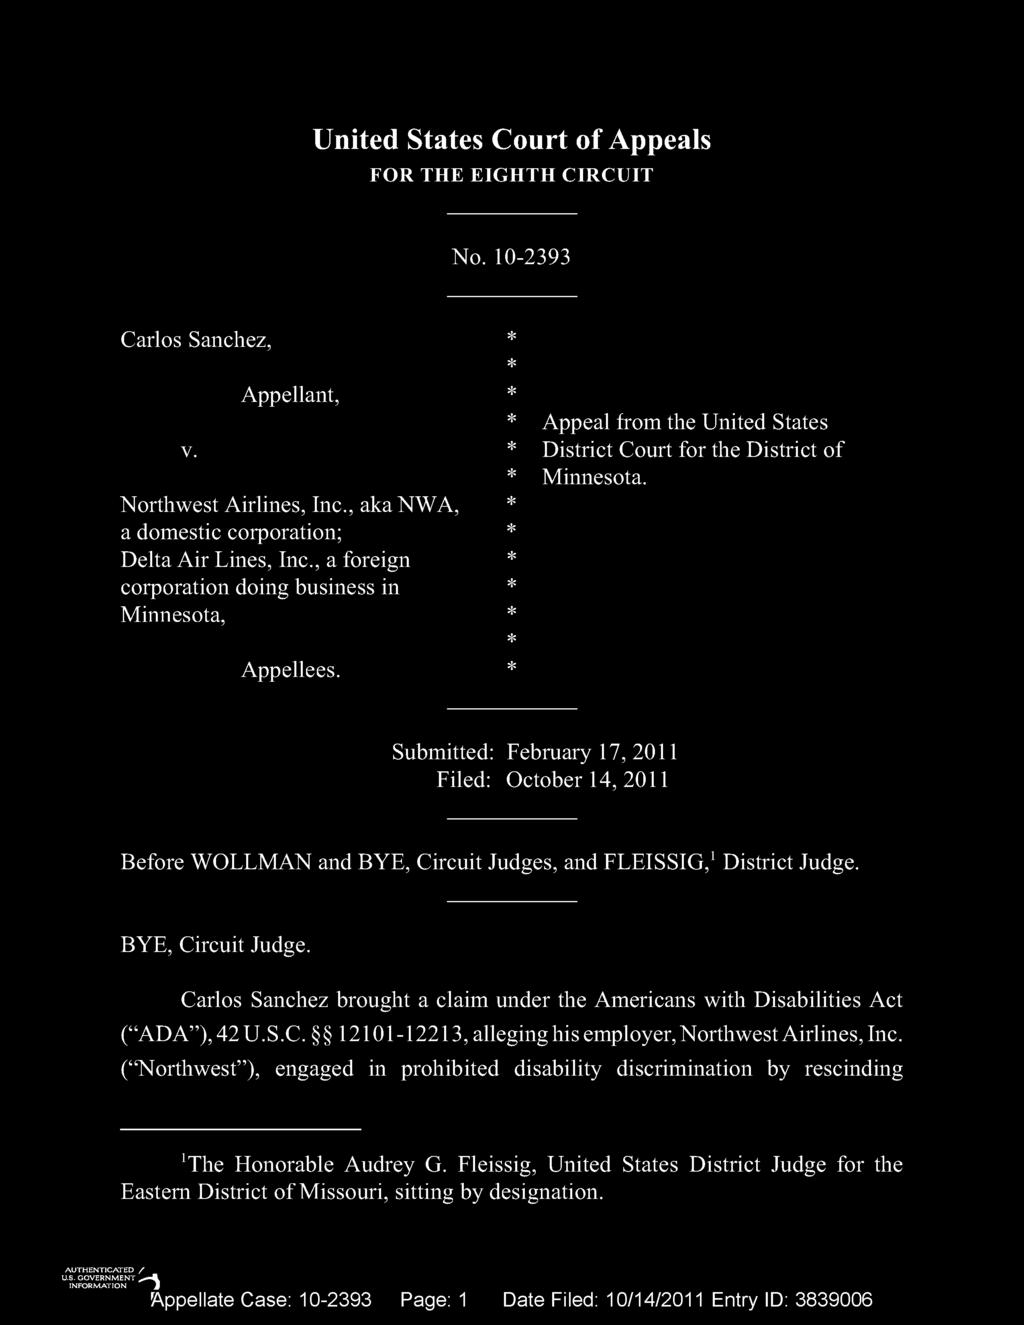 Submitted: February 17, 2011 Filed: October 14, 2011 Before WOLLMAN and BYE, Circuit Judges, and FLEISSIG,1District Judge. BYE, Circuit Judge. Carlos Sanchez brought a claim under the Americans with Disabilities Act ( ADA ), 42 U.